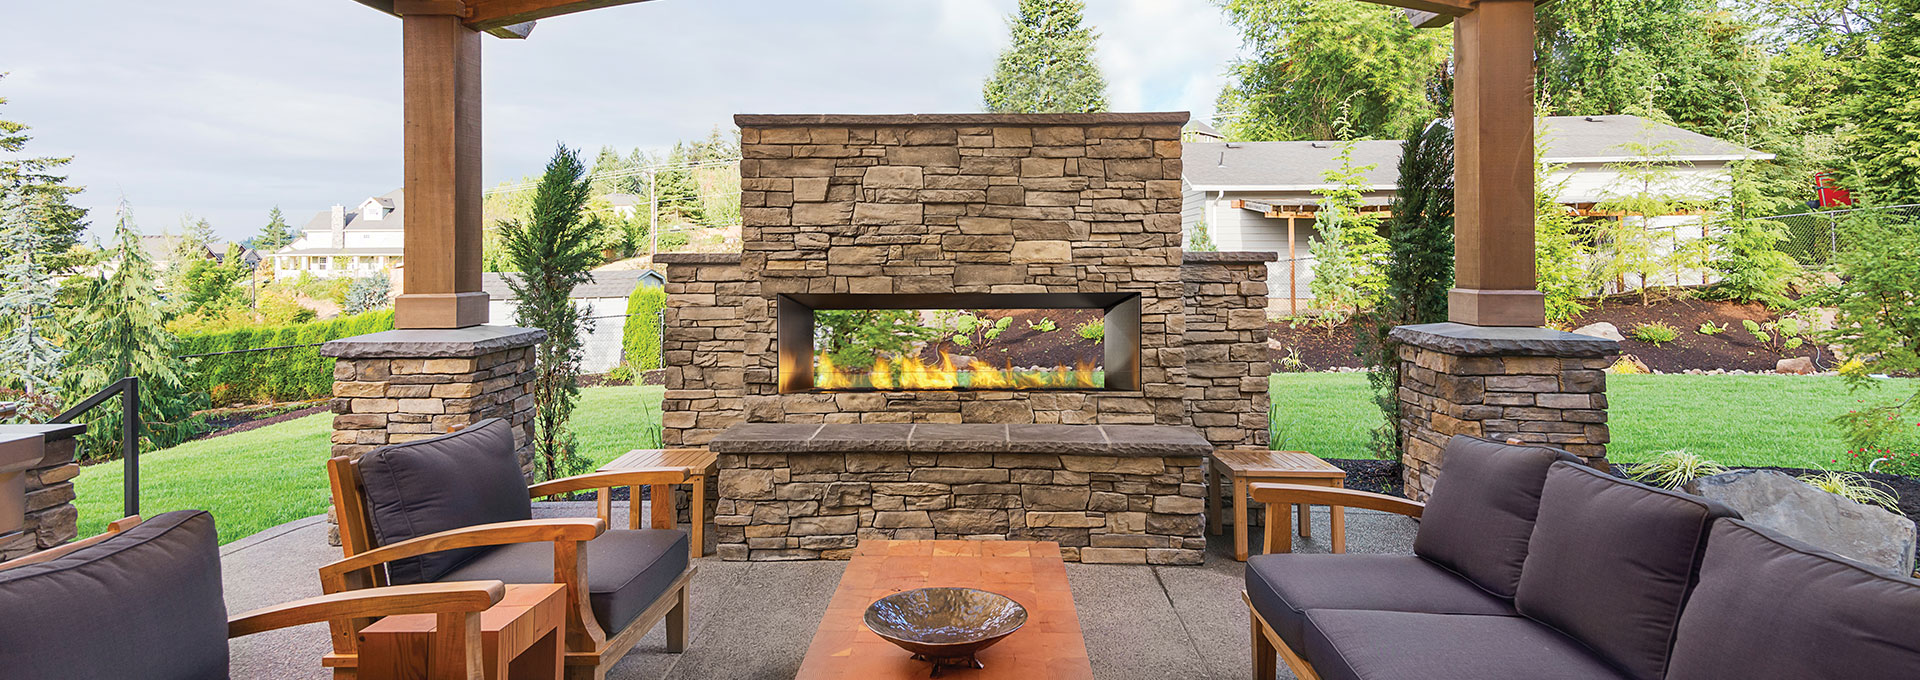 Outdoor Gas Fireplaces Fireplace Kits, Linear Gas Fireplace Outdoor